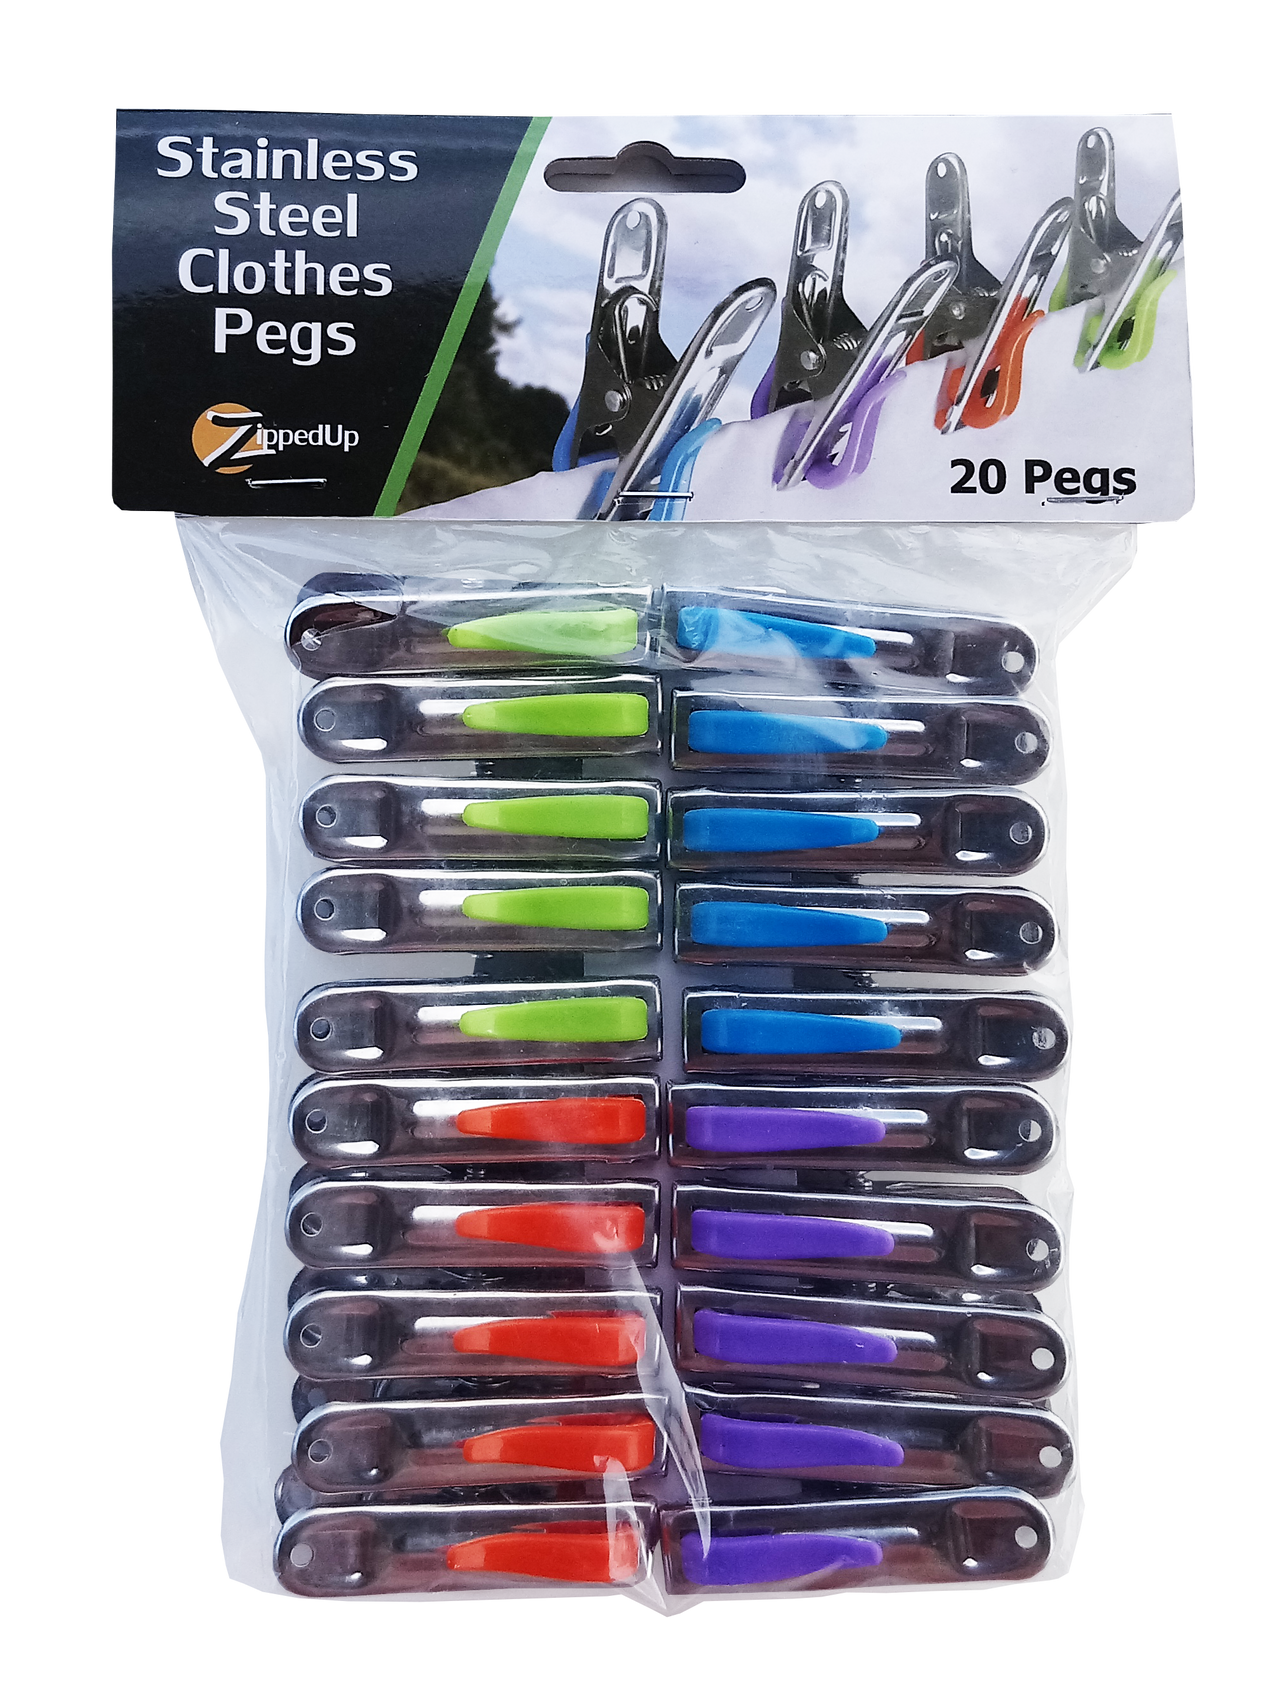 Stainless steel clothes pegs